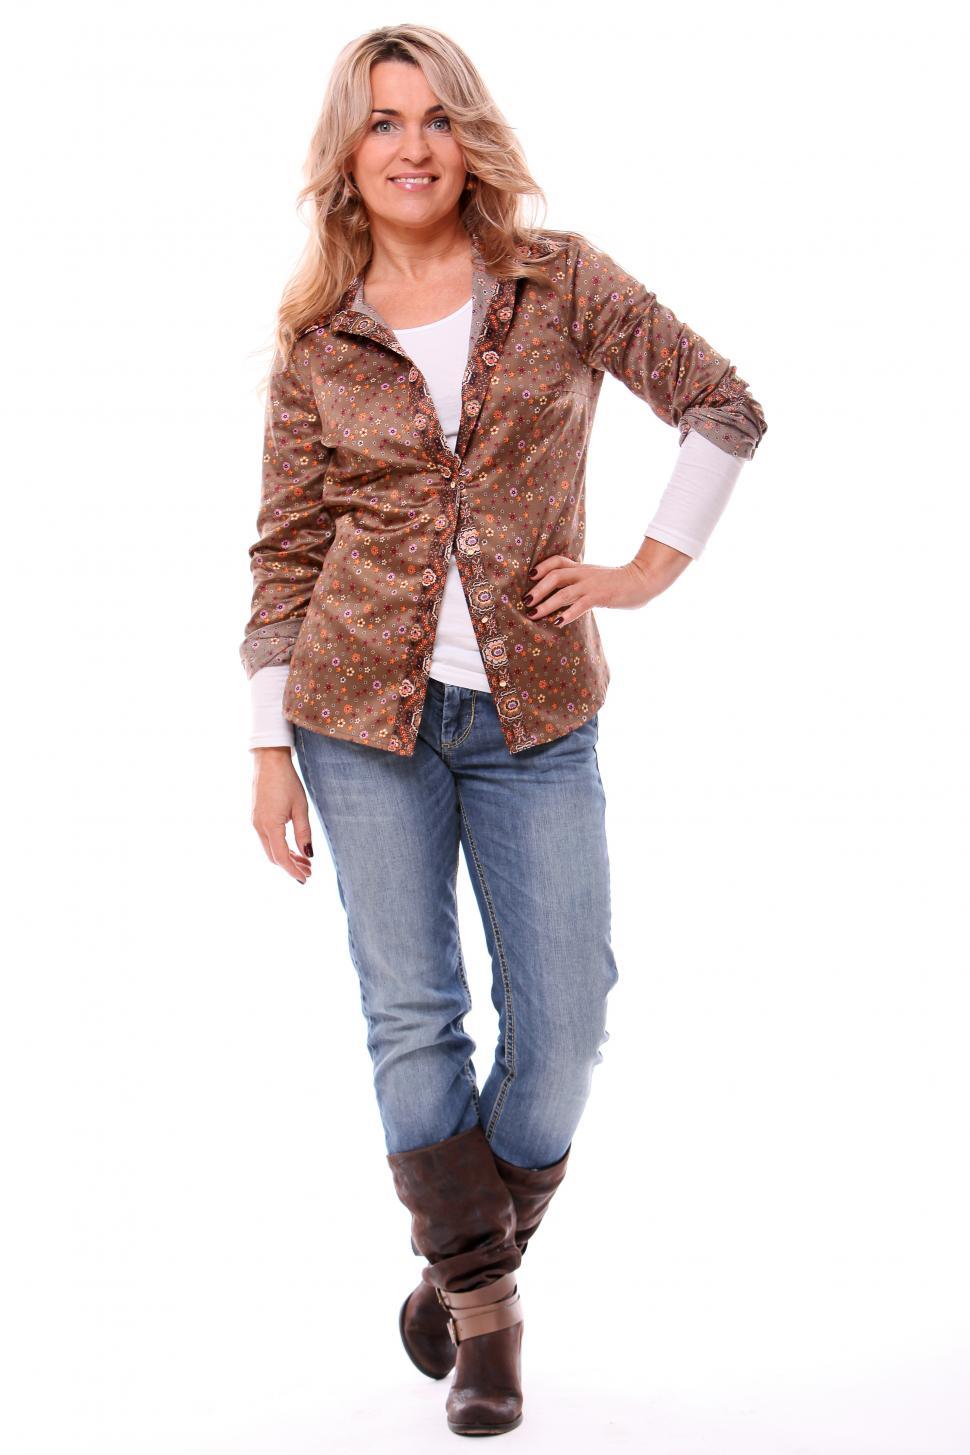 Free Image of Adult woman in fashionable casual clothes 